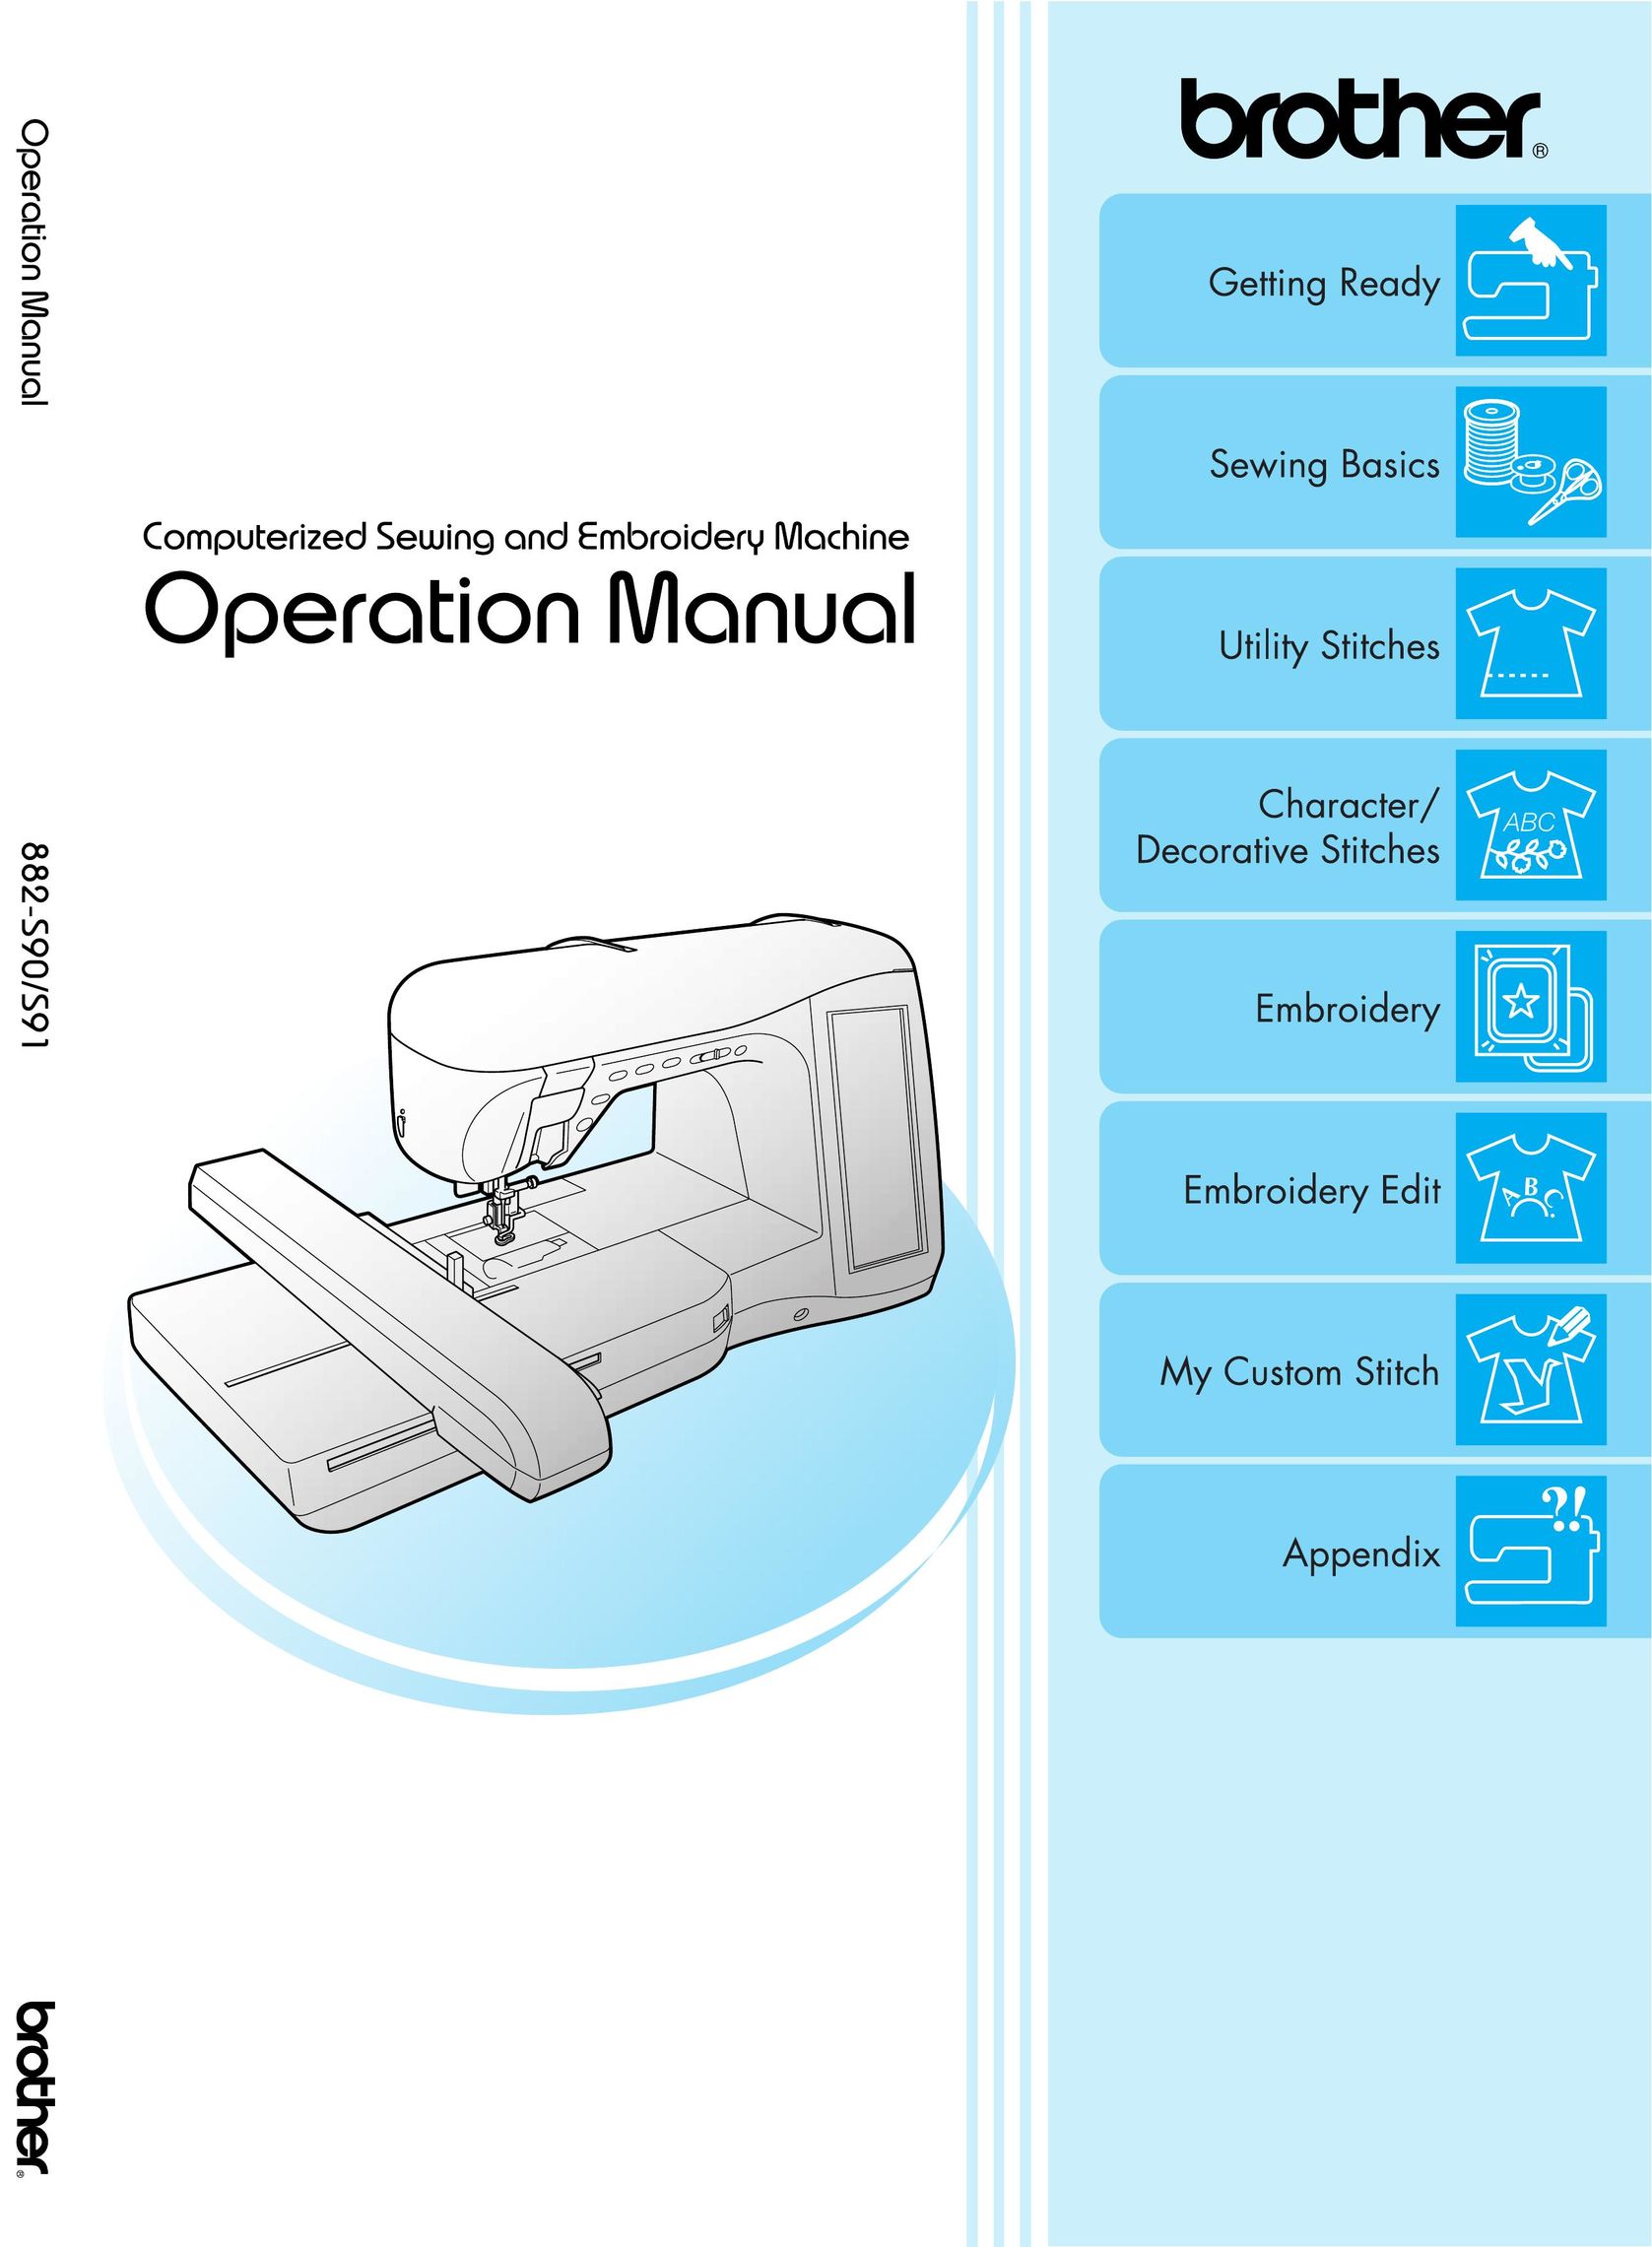 Brother 882-S90/S91 Sewing Machine User Manual (Page 1)